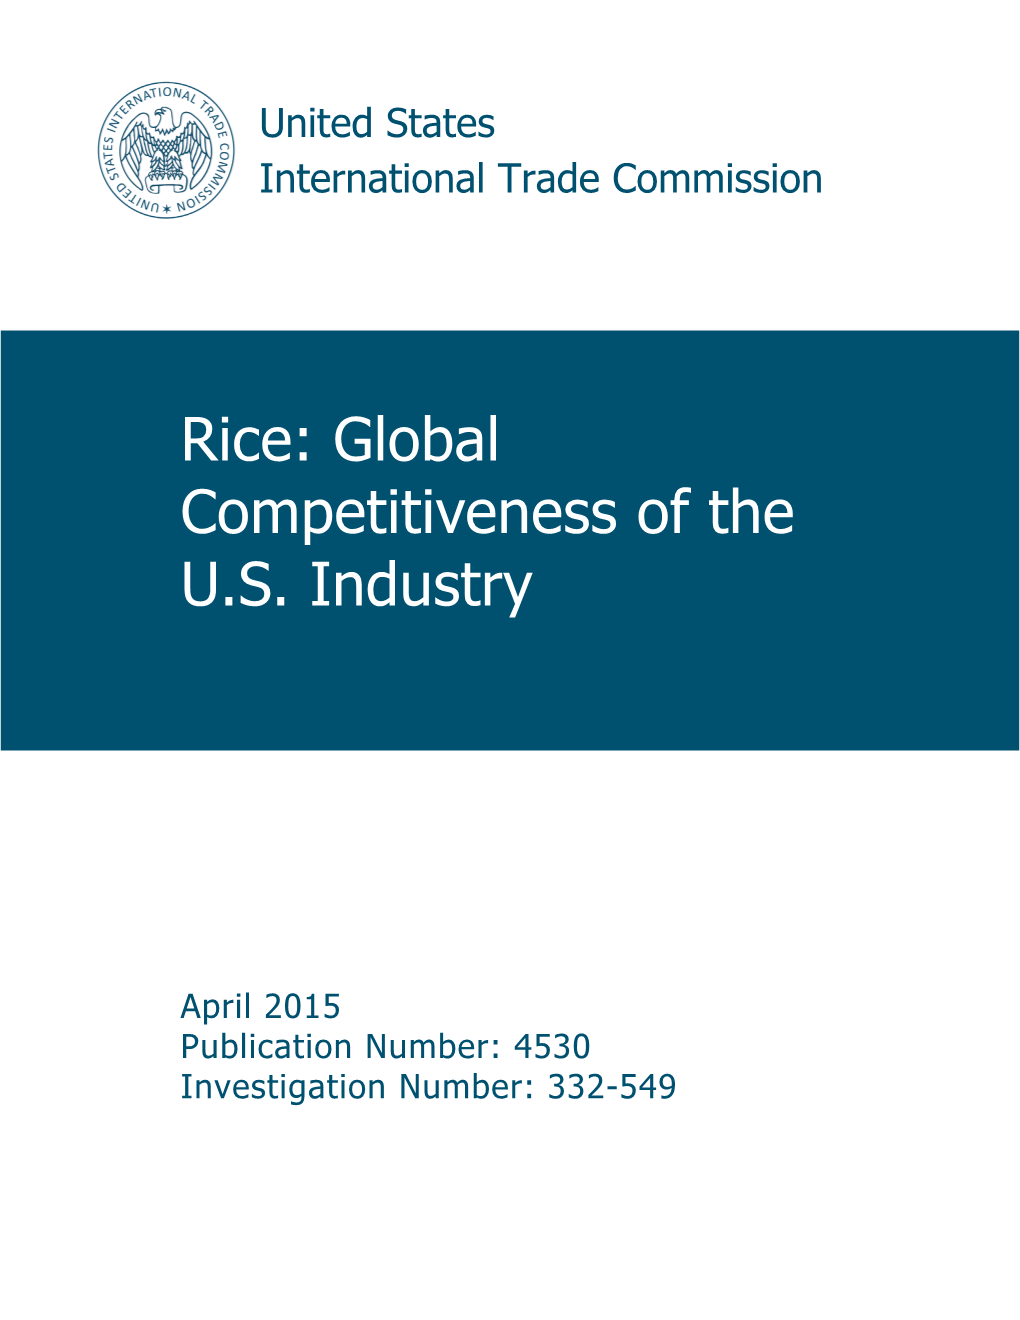 Rice: Global Competitiveness of the U.S